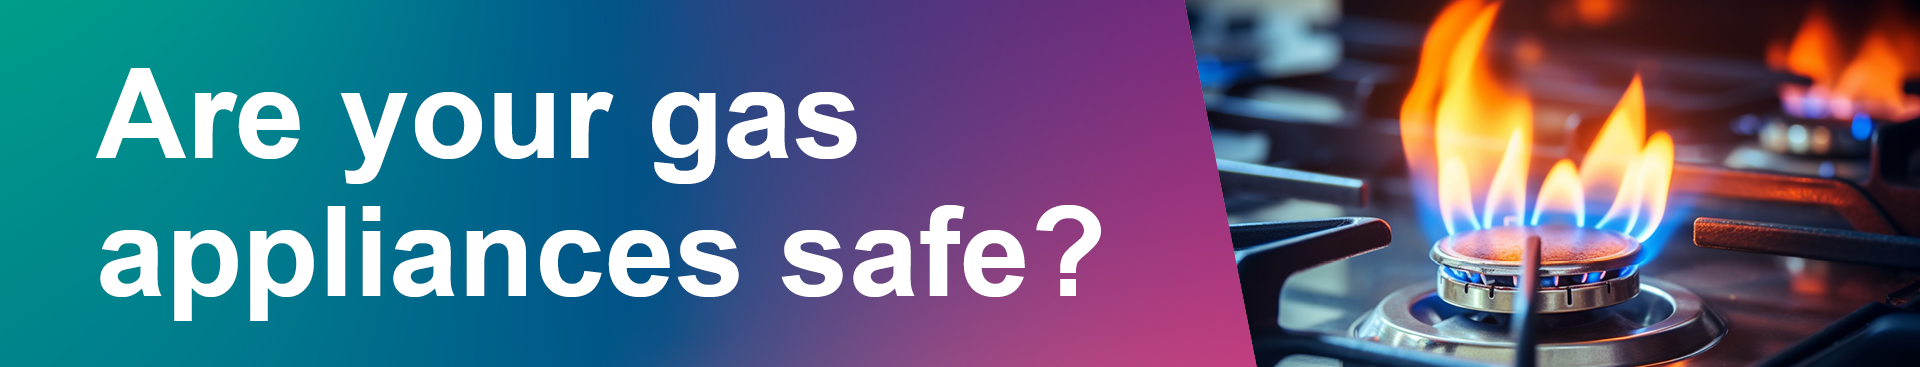 are your gas appliances safe?